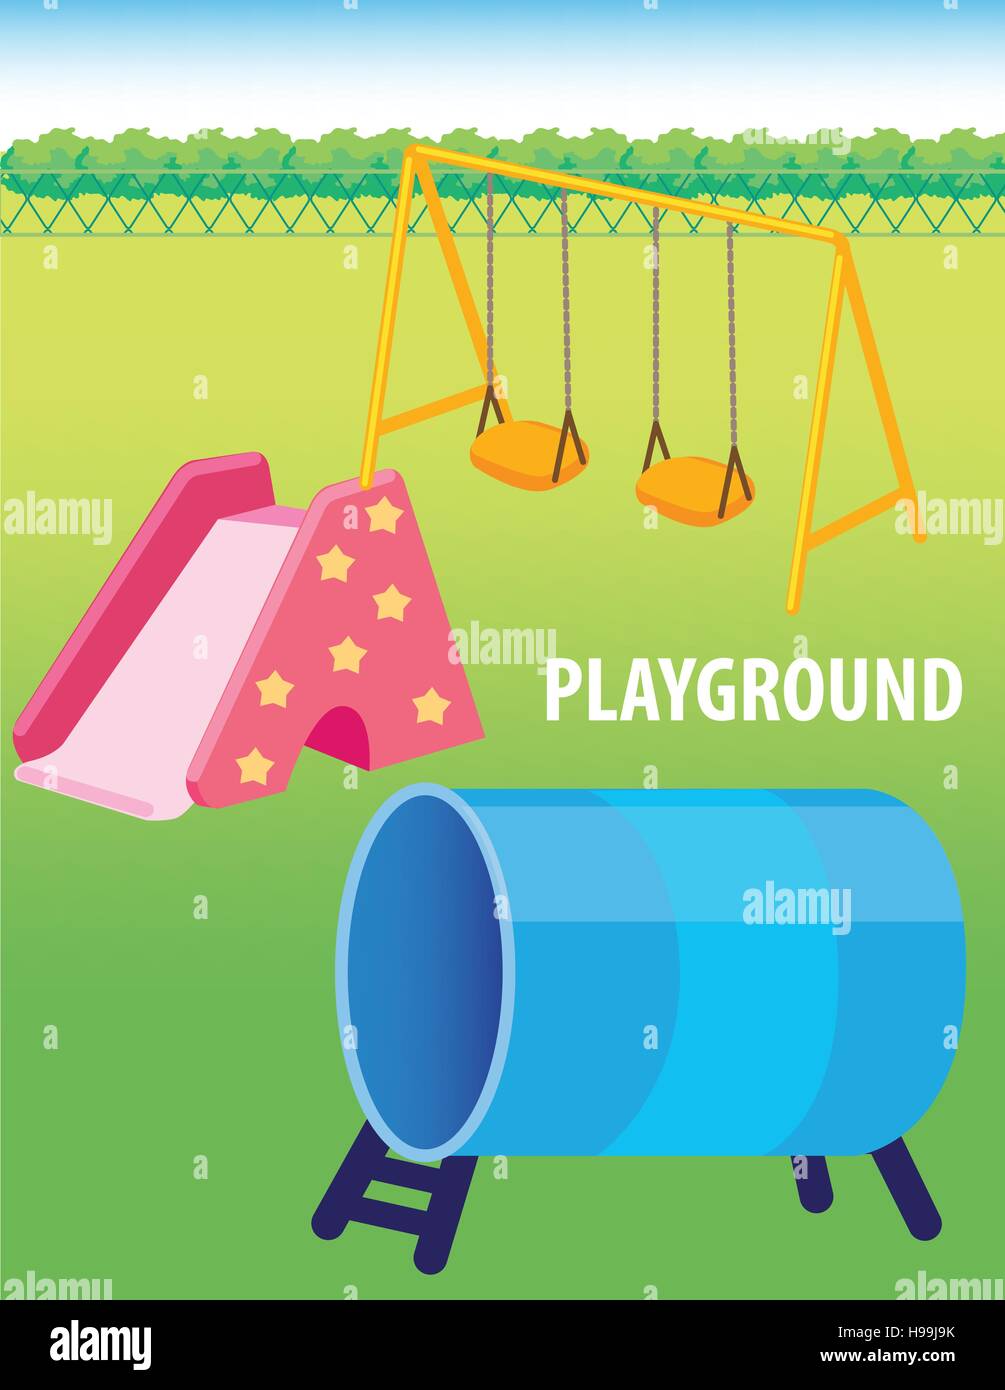 Vector illustration of Playground Stock Vector